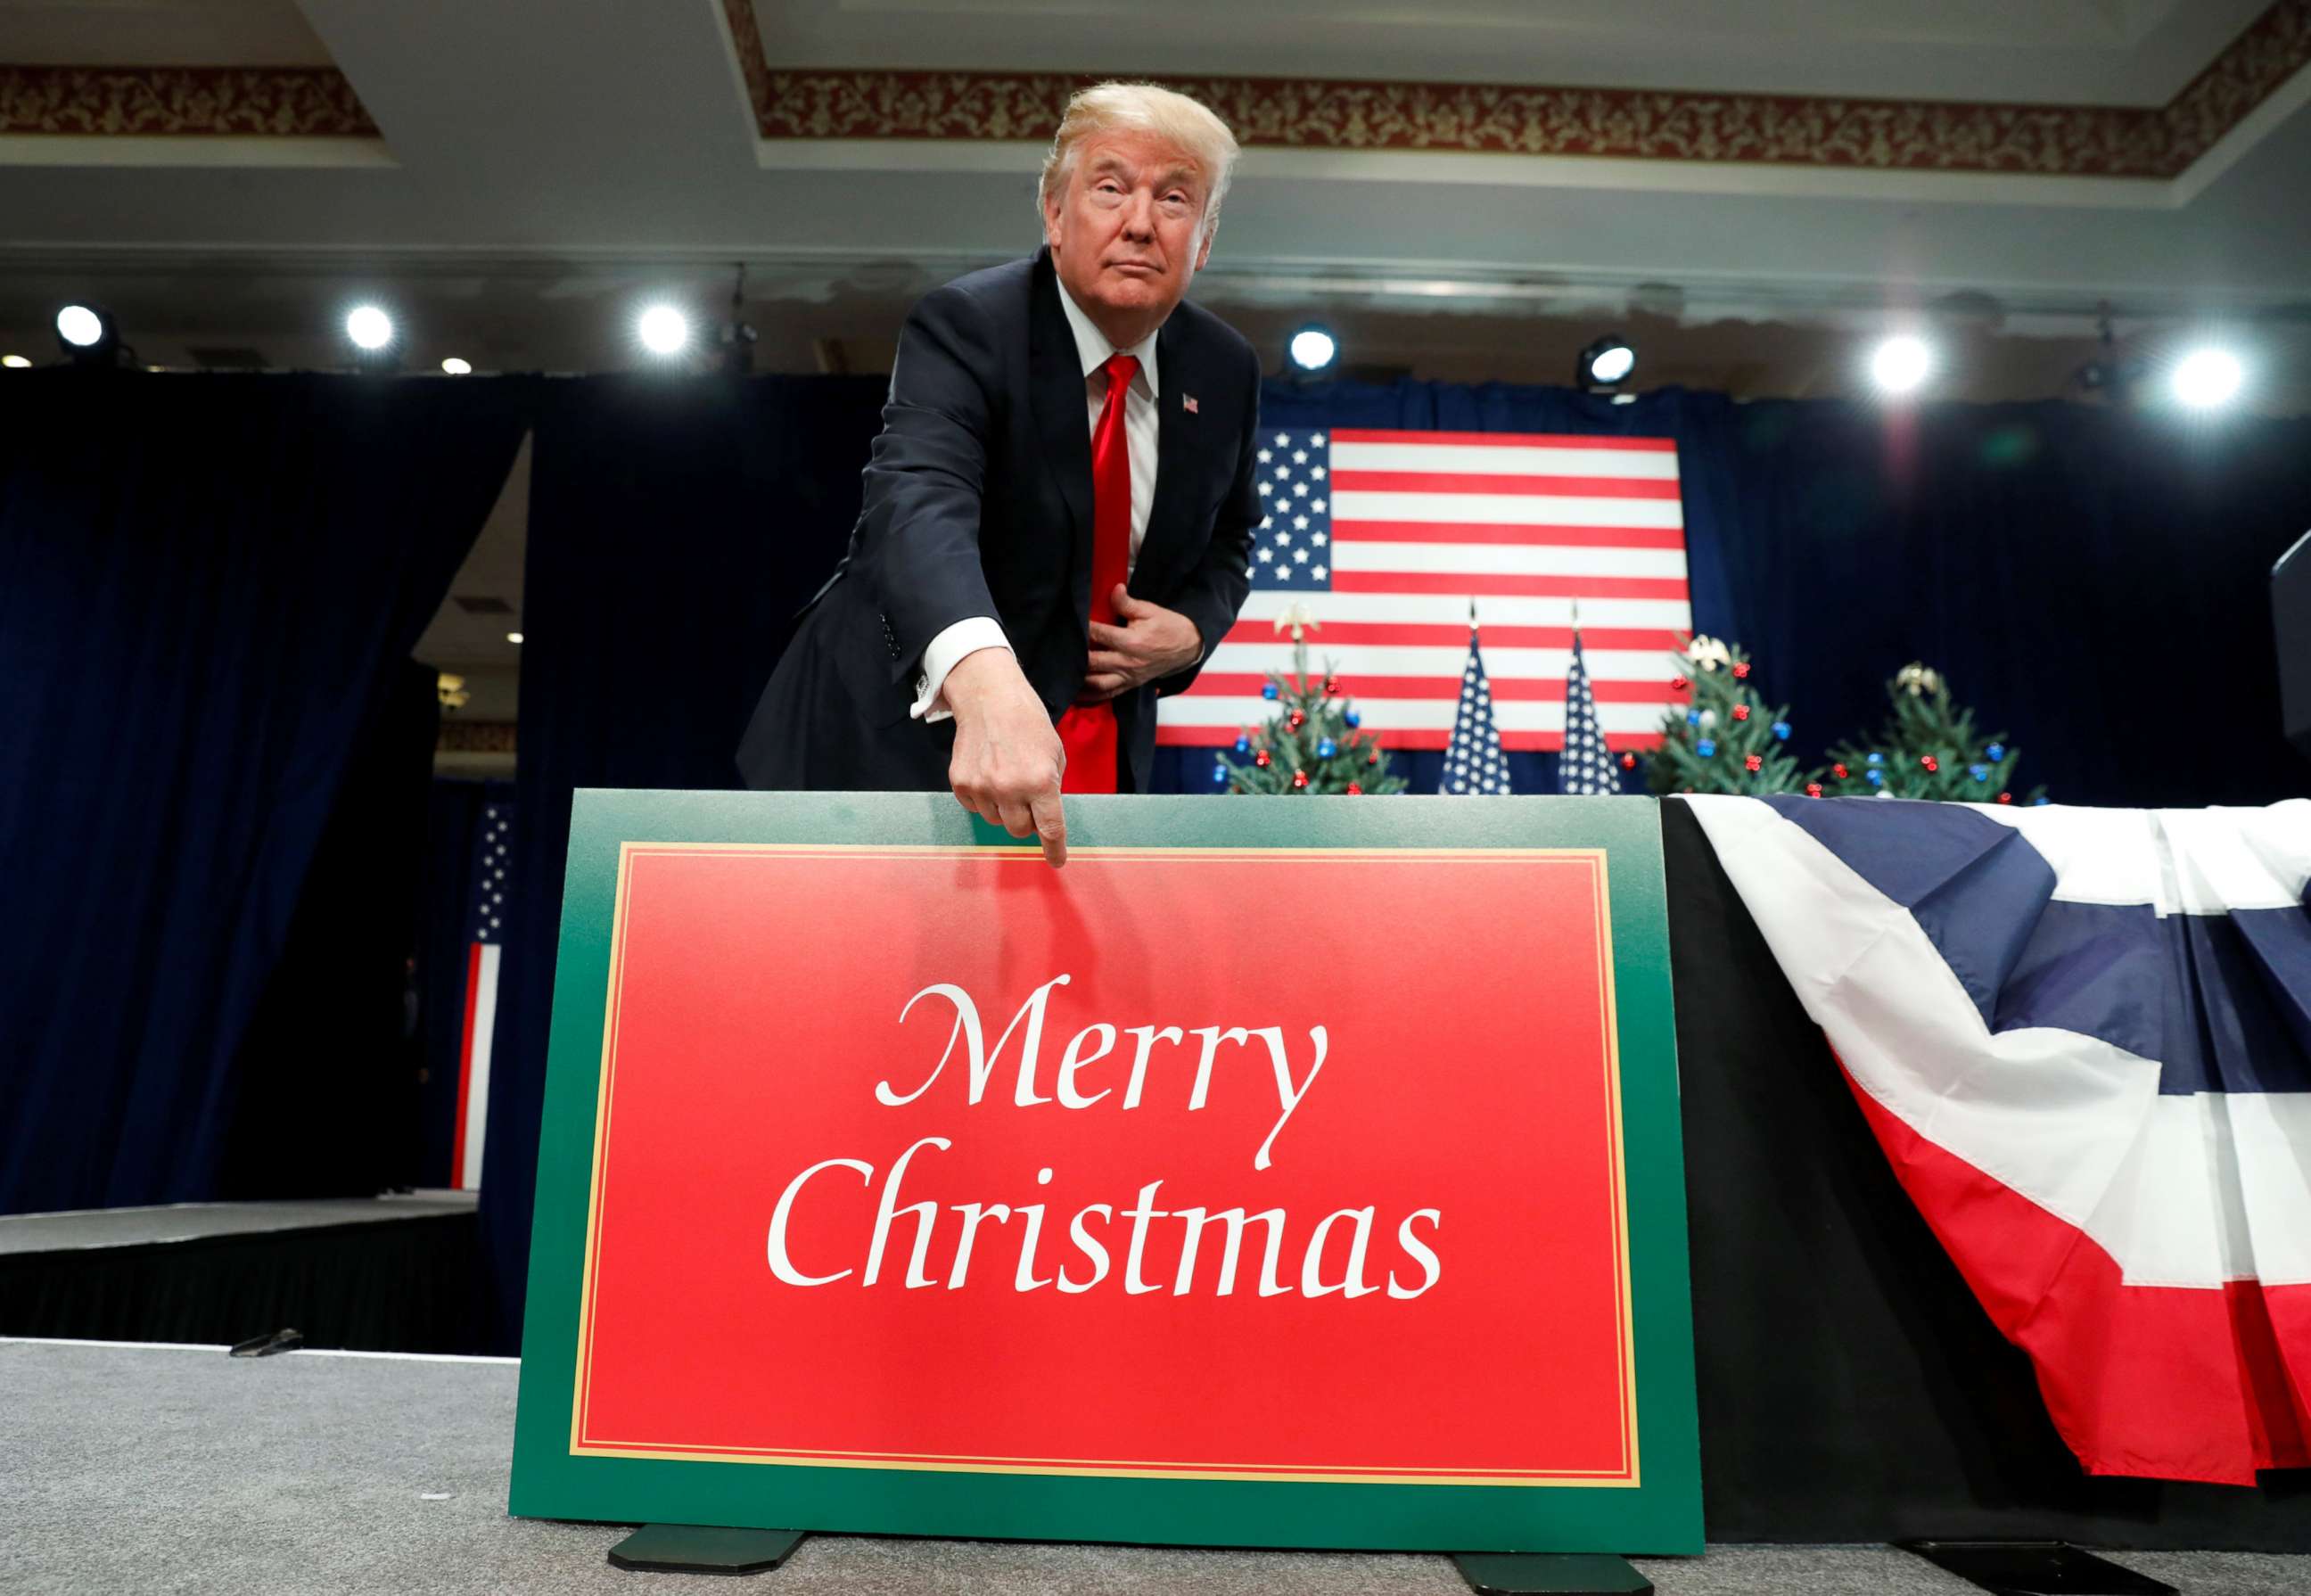 PHOTO: President Donald Trump points to a "Merry Christmas" placard on the stage as he arrives to deliver remarks on tax reform in St. Louis, Mo., Nov. 29, 2017.